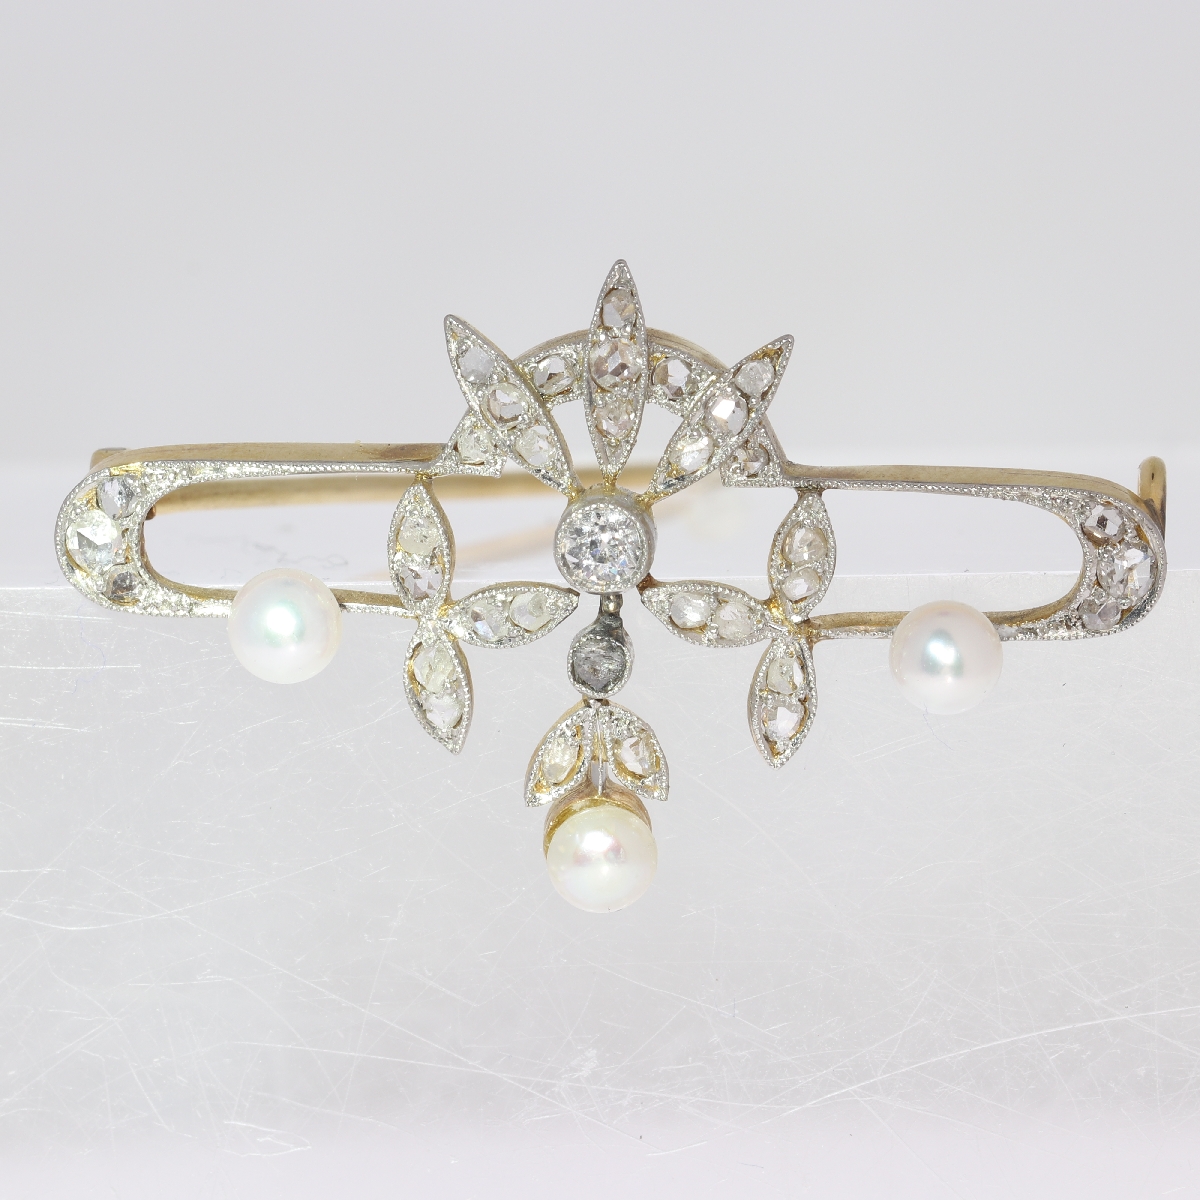 Belle epoque brooch with brilliant cut and rose cut diamonds and pearls